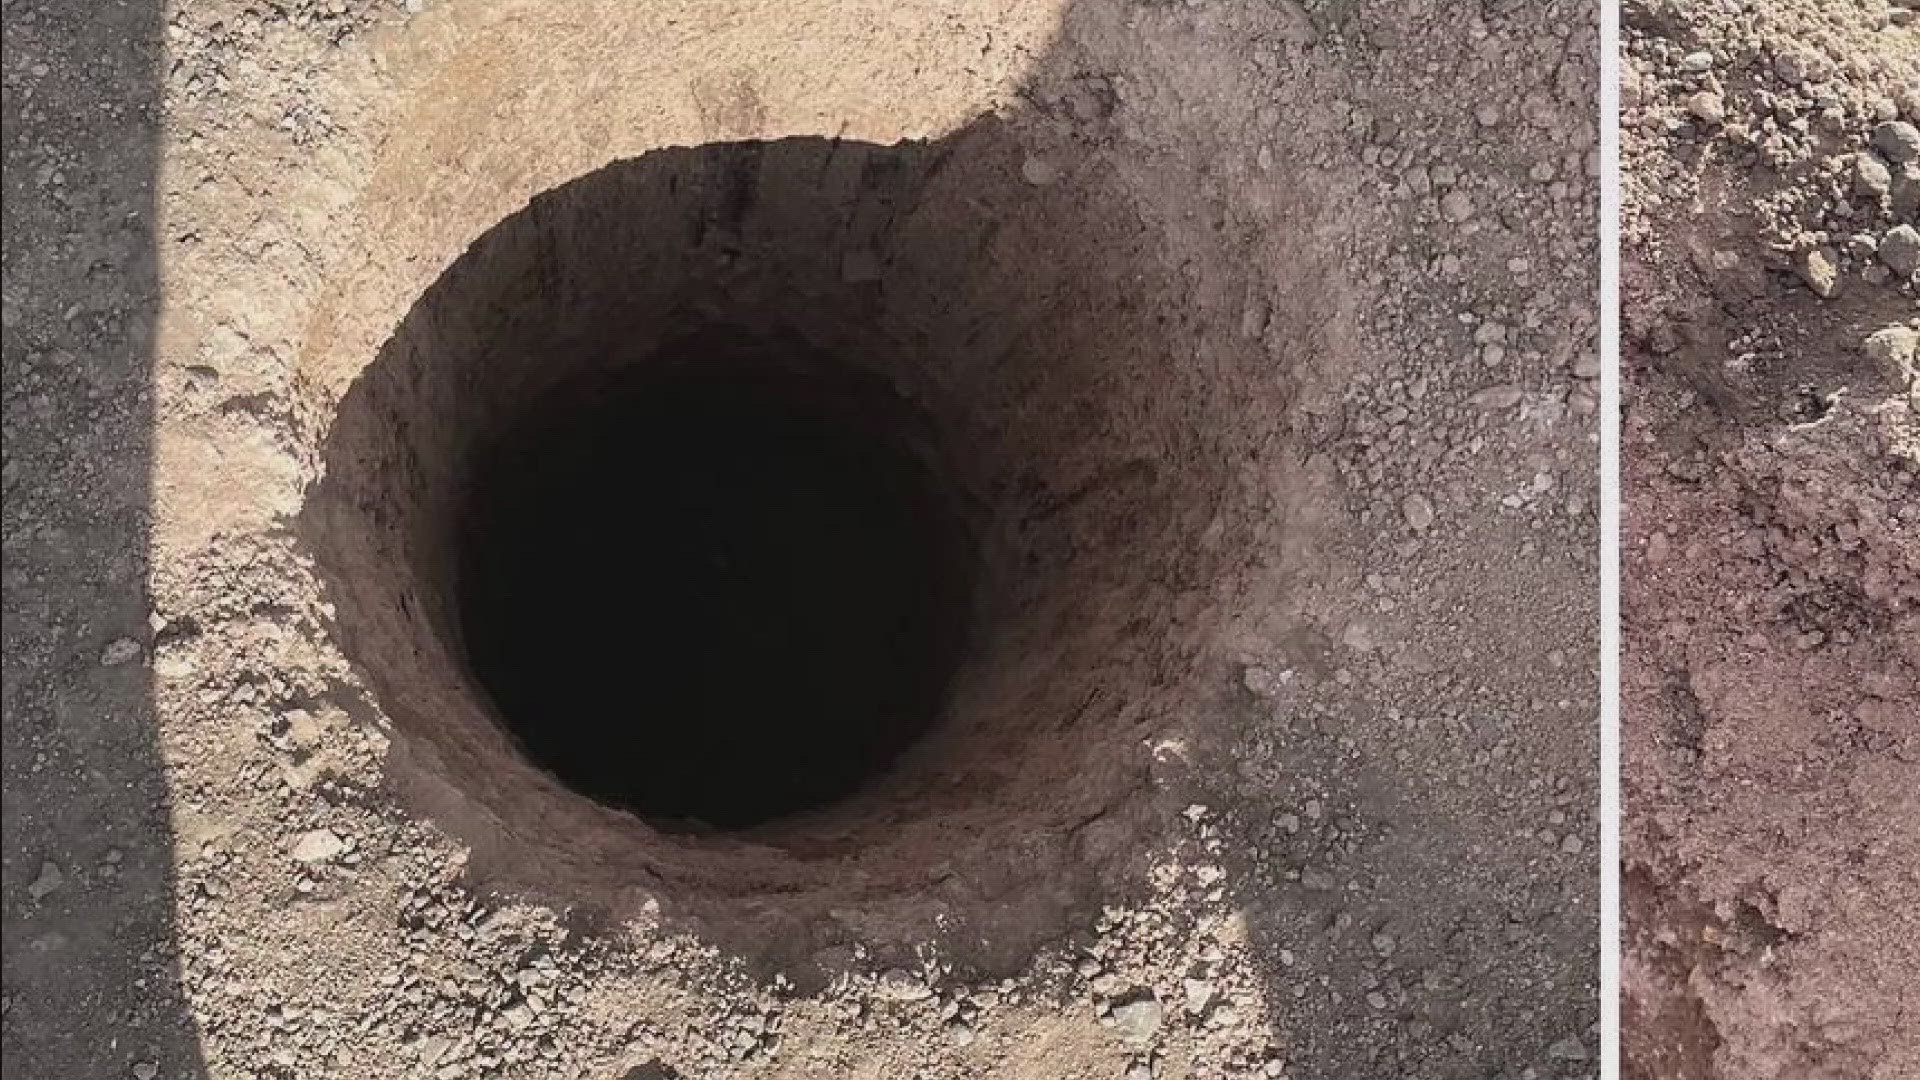 Woman rescued after falling in hole